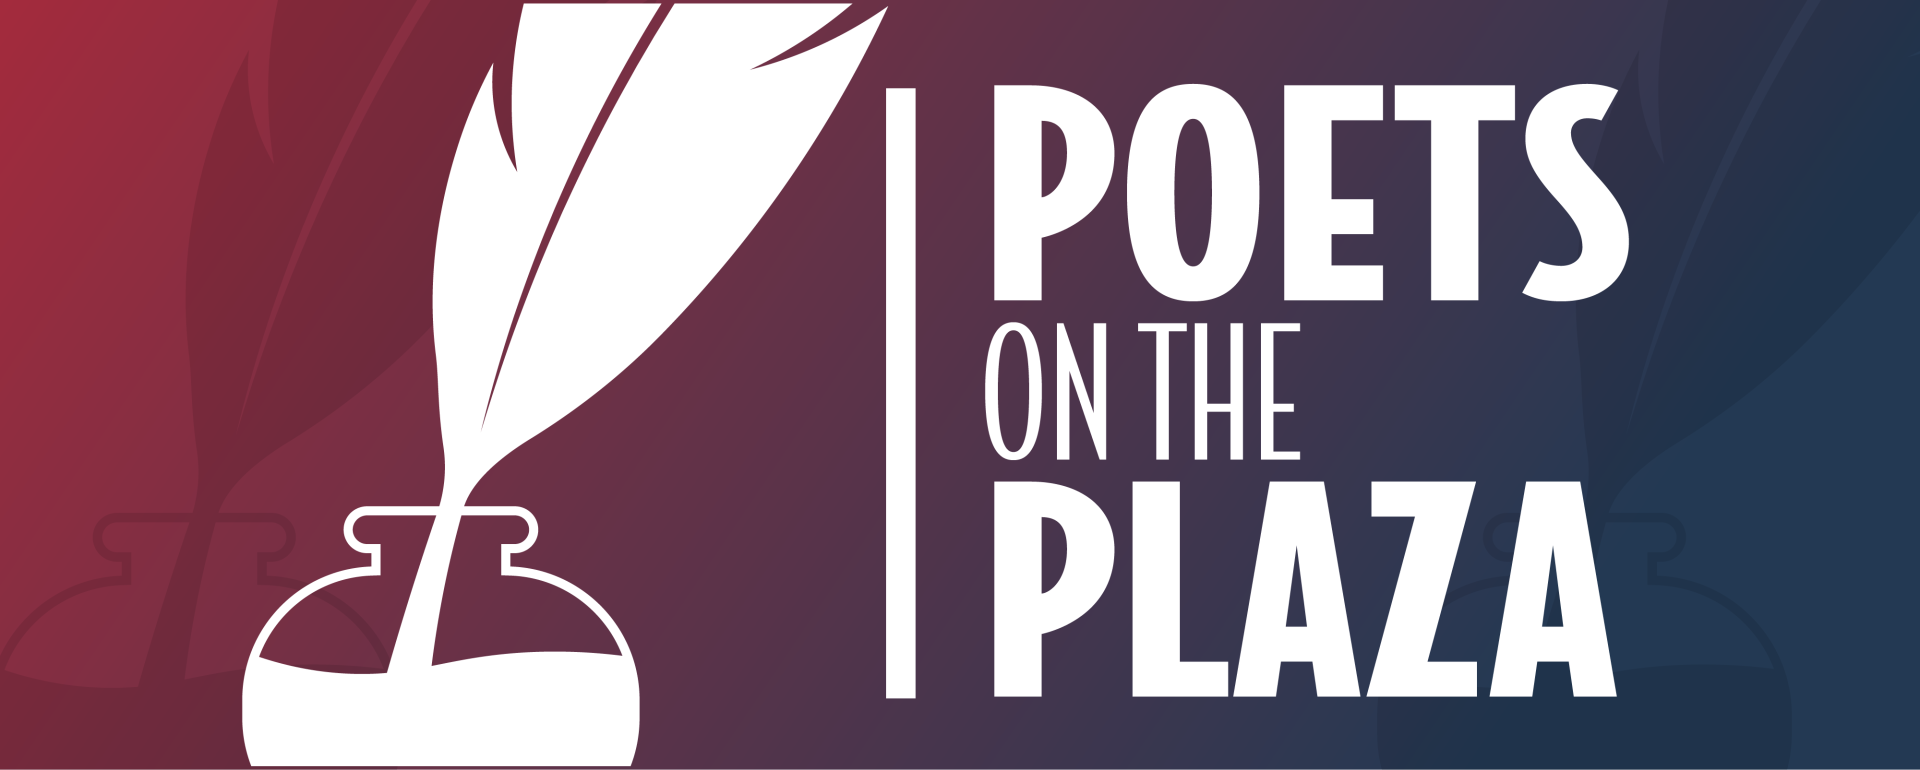 Poets on the Plaza_Web_Banner_ 1920x770